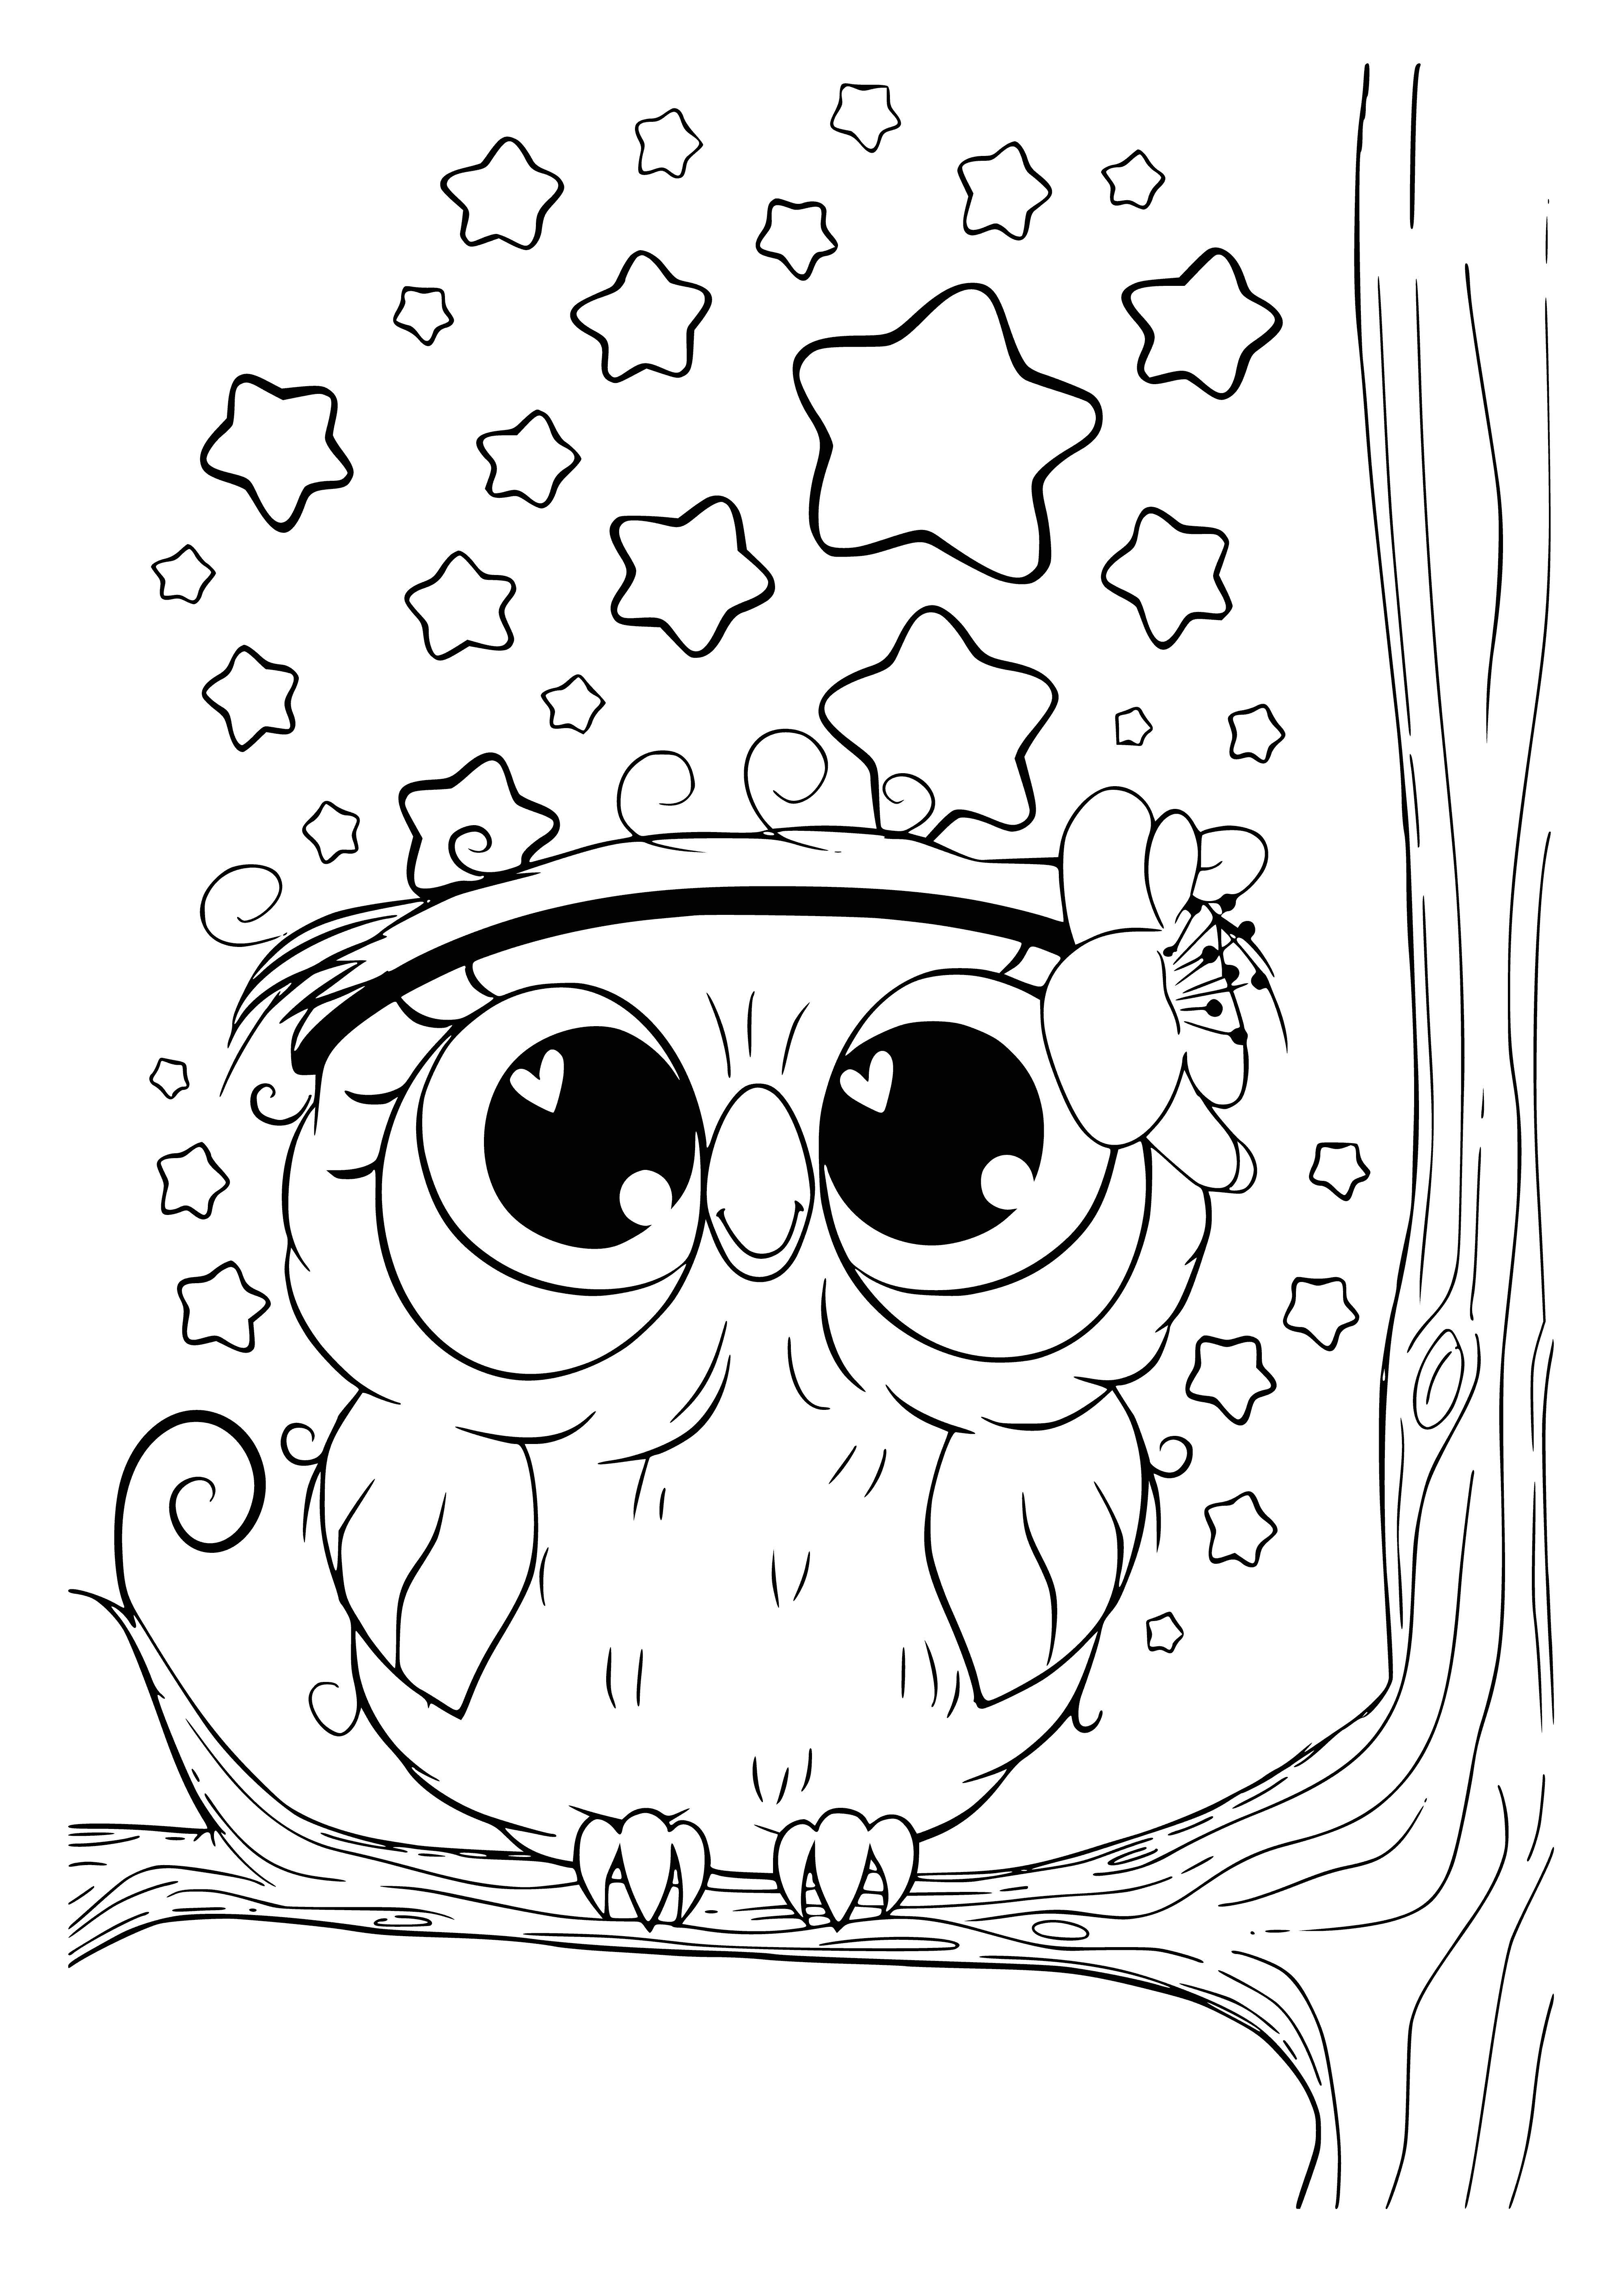 Owlet on a branch coloring page